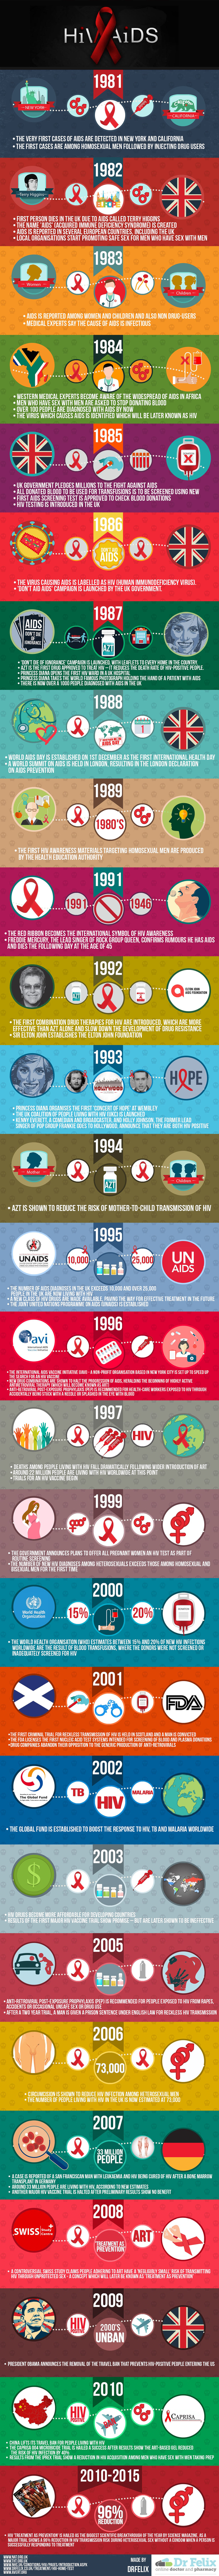 Discovery and Treatment of Aids HIV Timeline Infographic